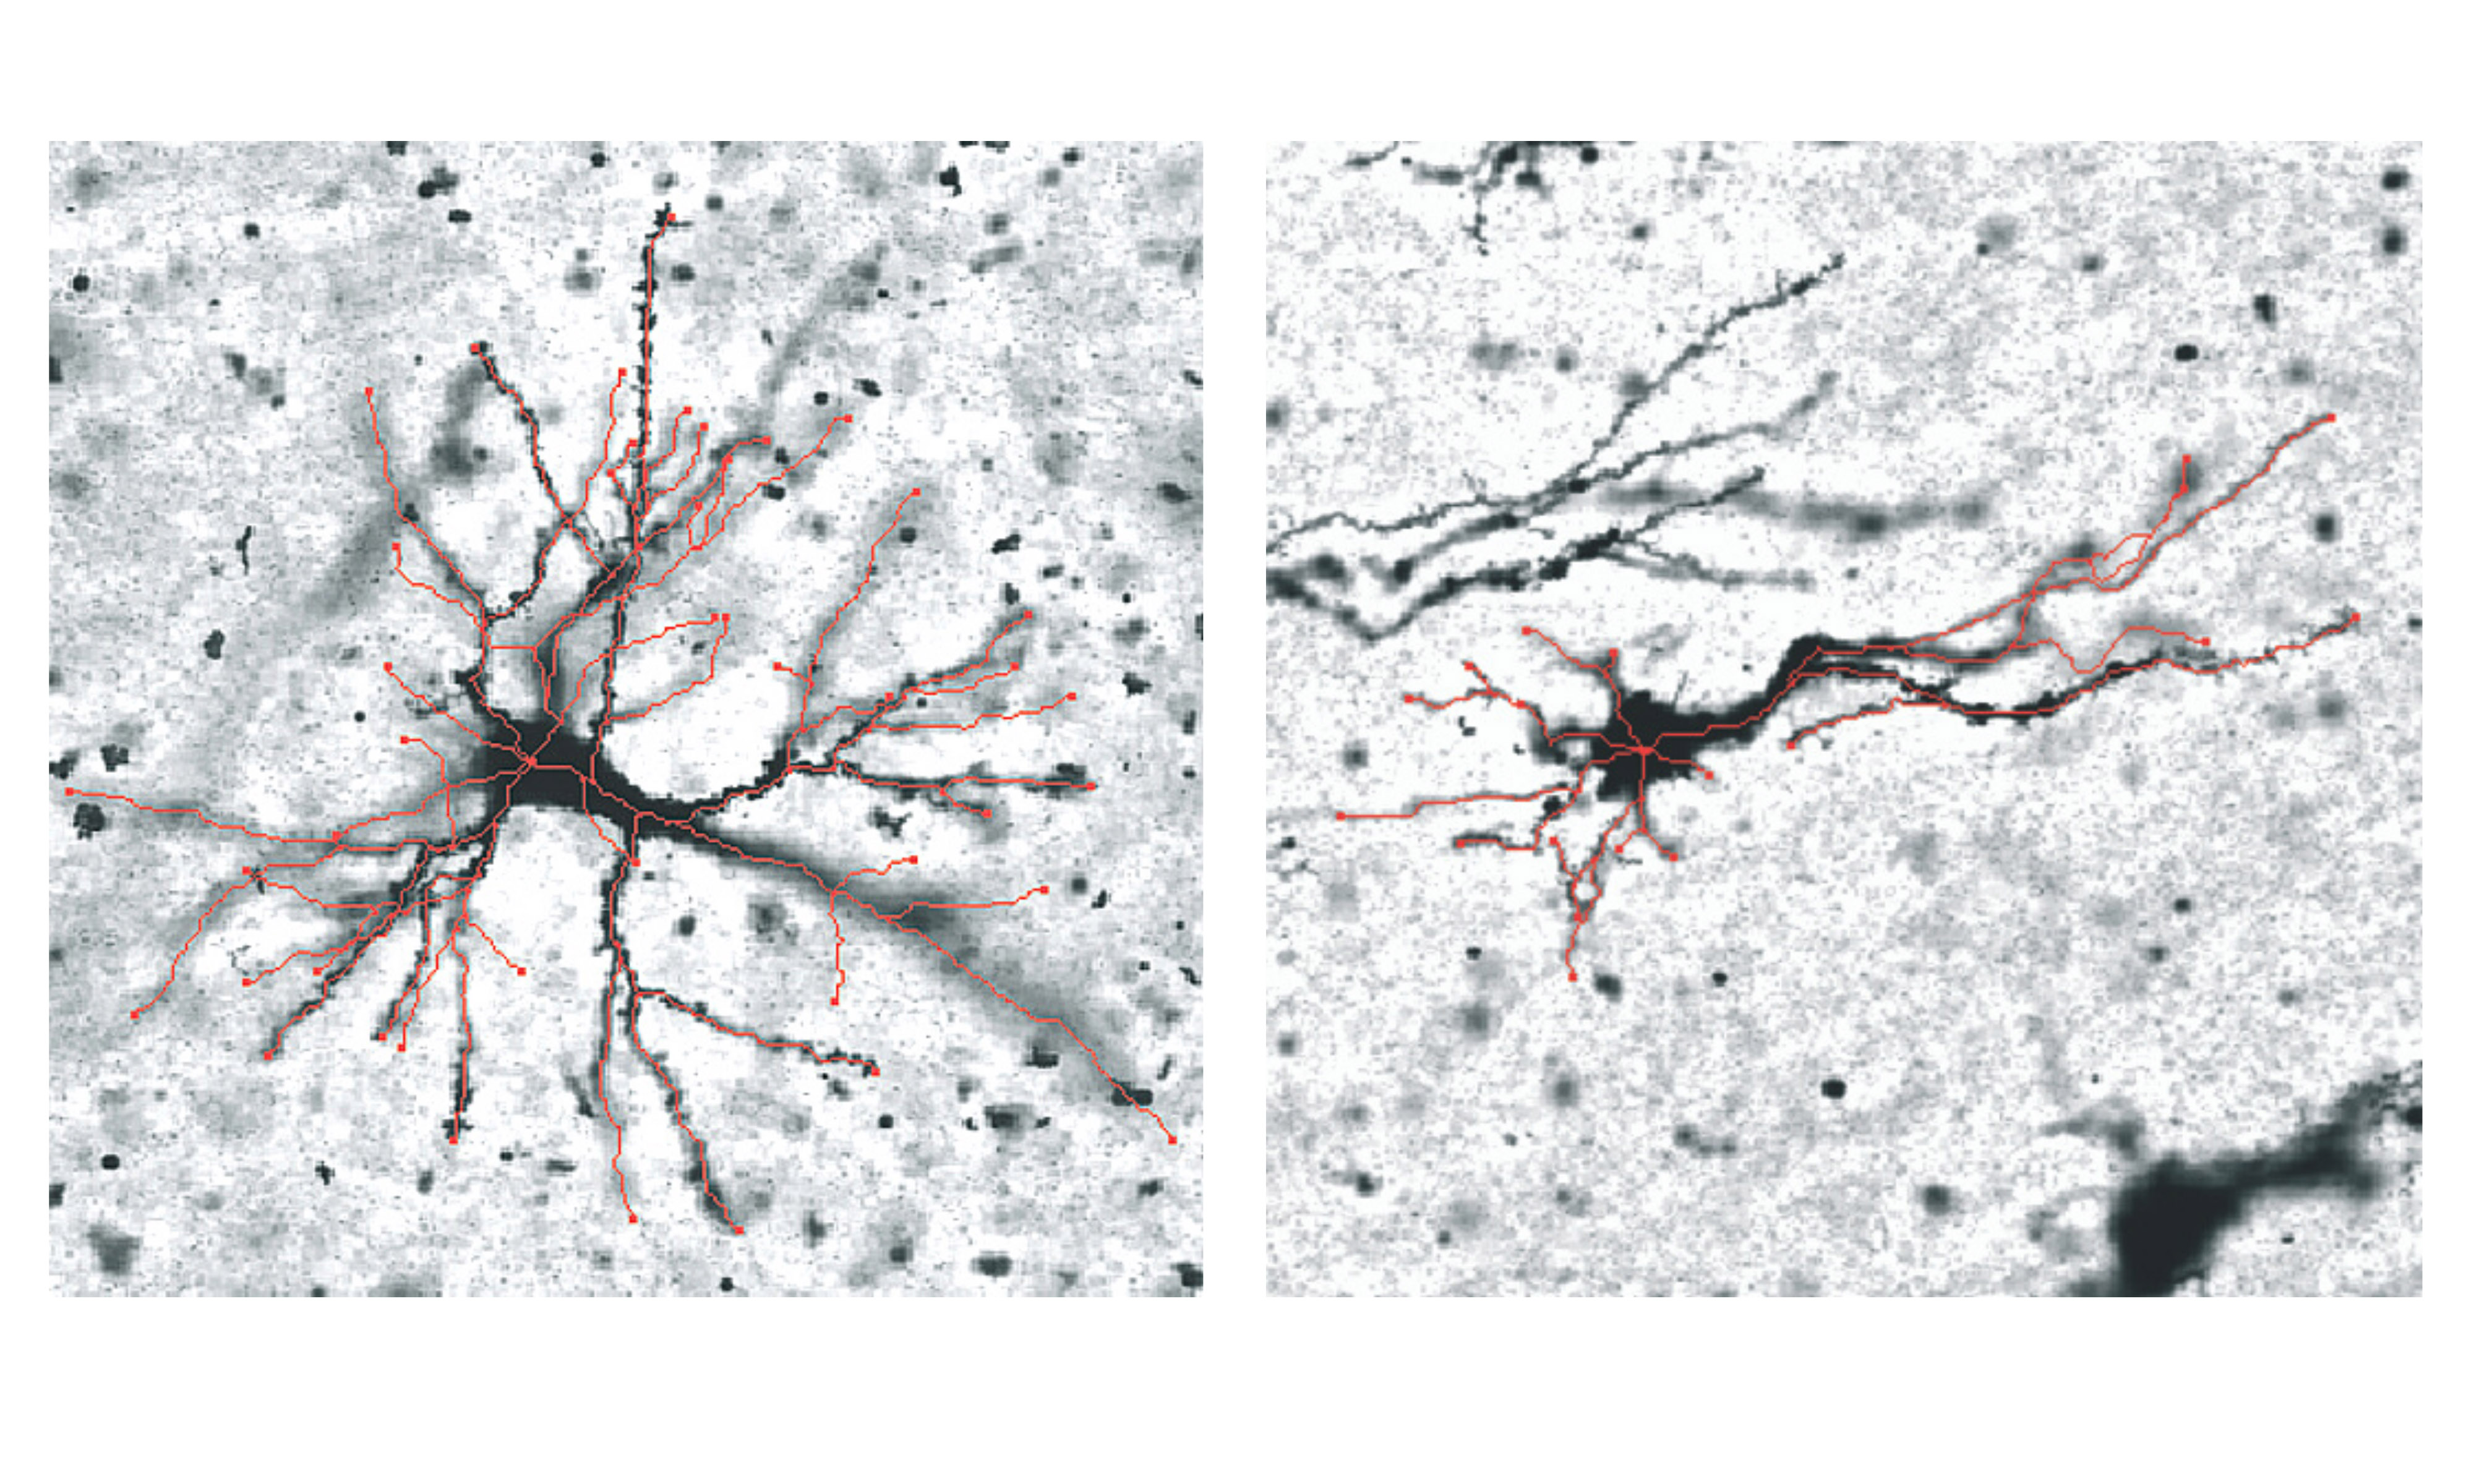 Grey matter neurons in the outward folds (left) and inward folds (right), with differences highlighted in red.